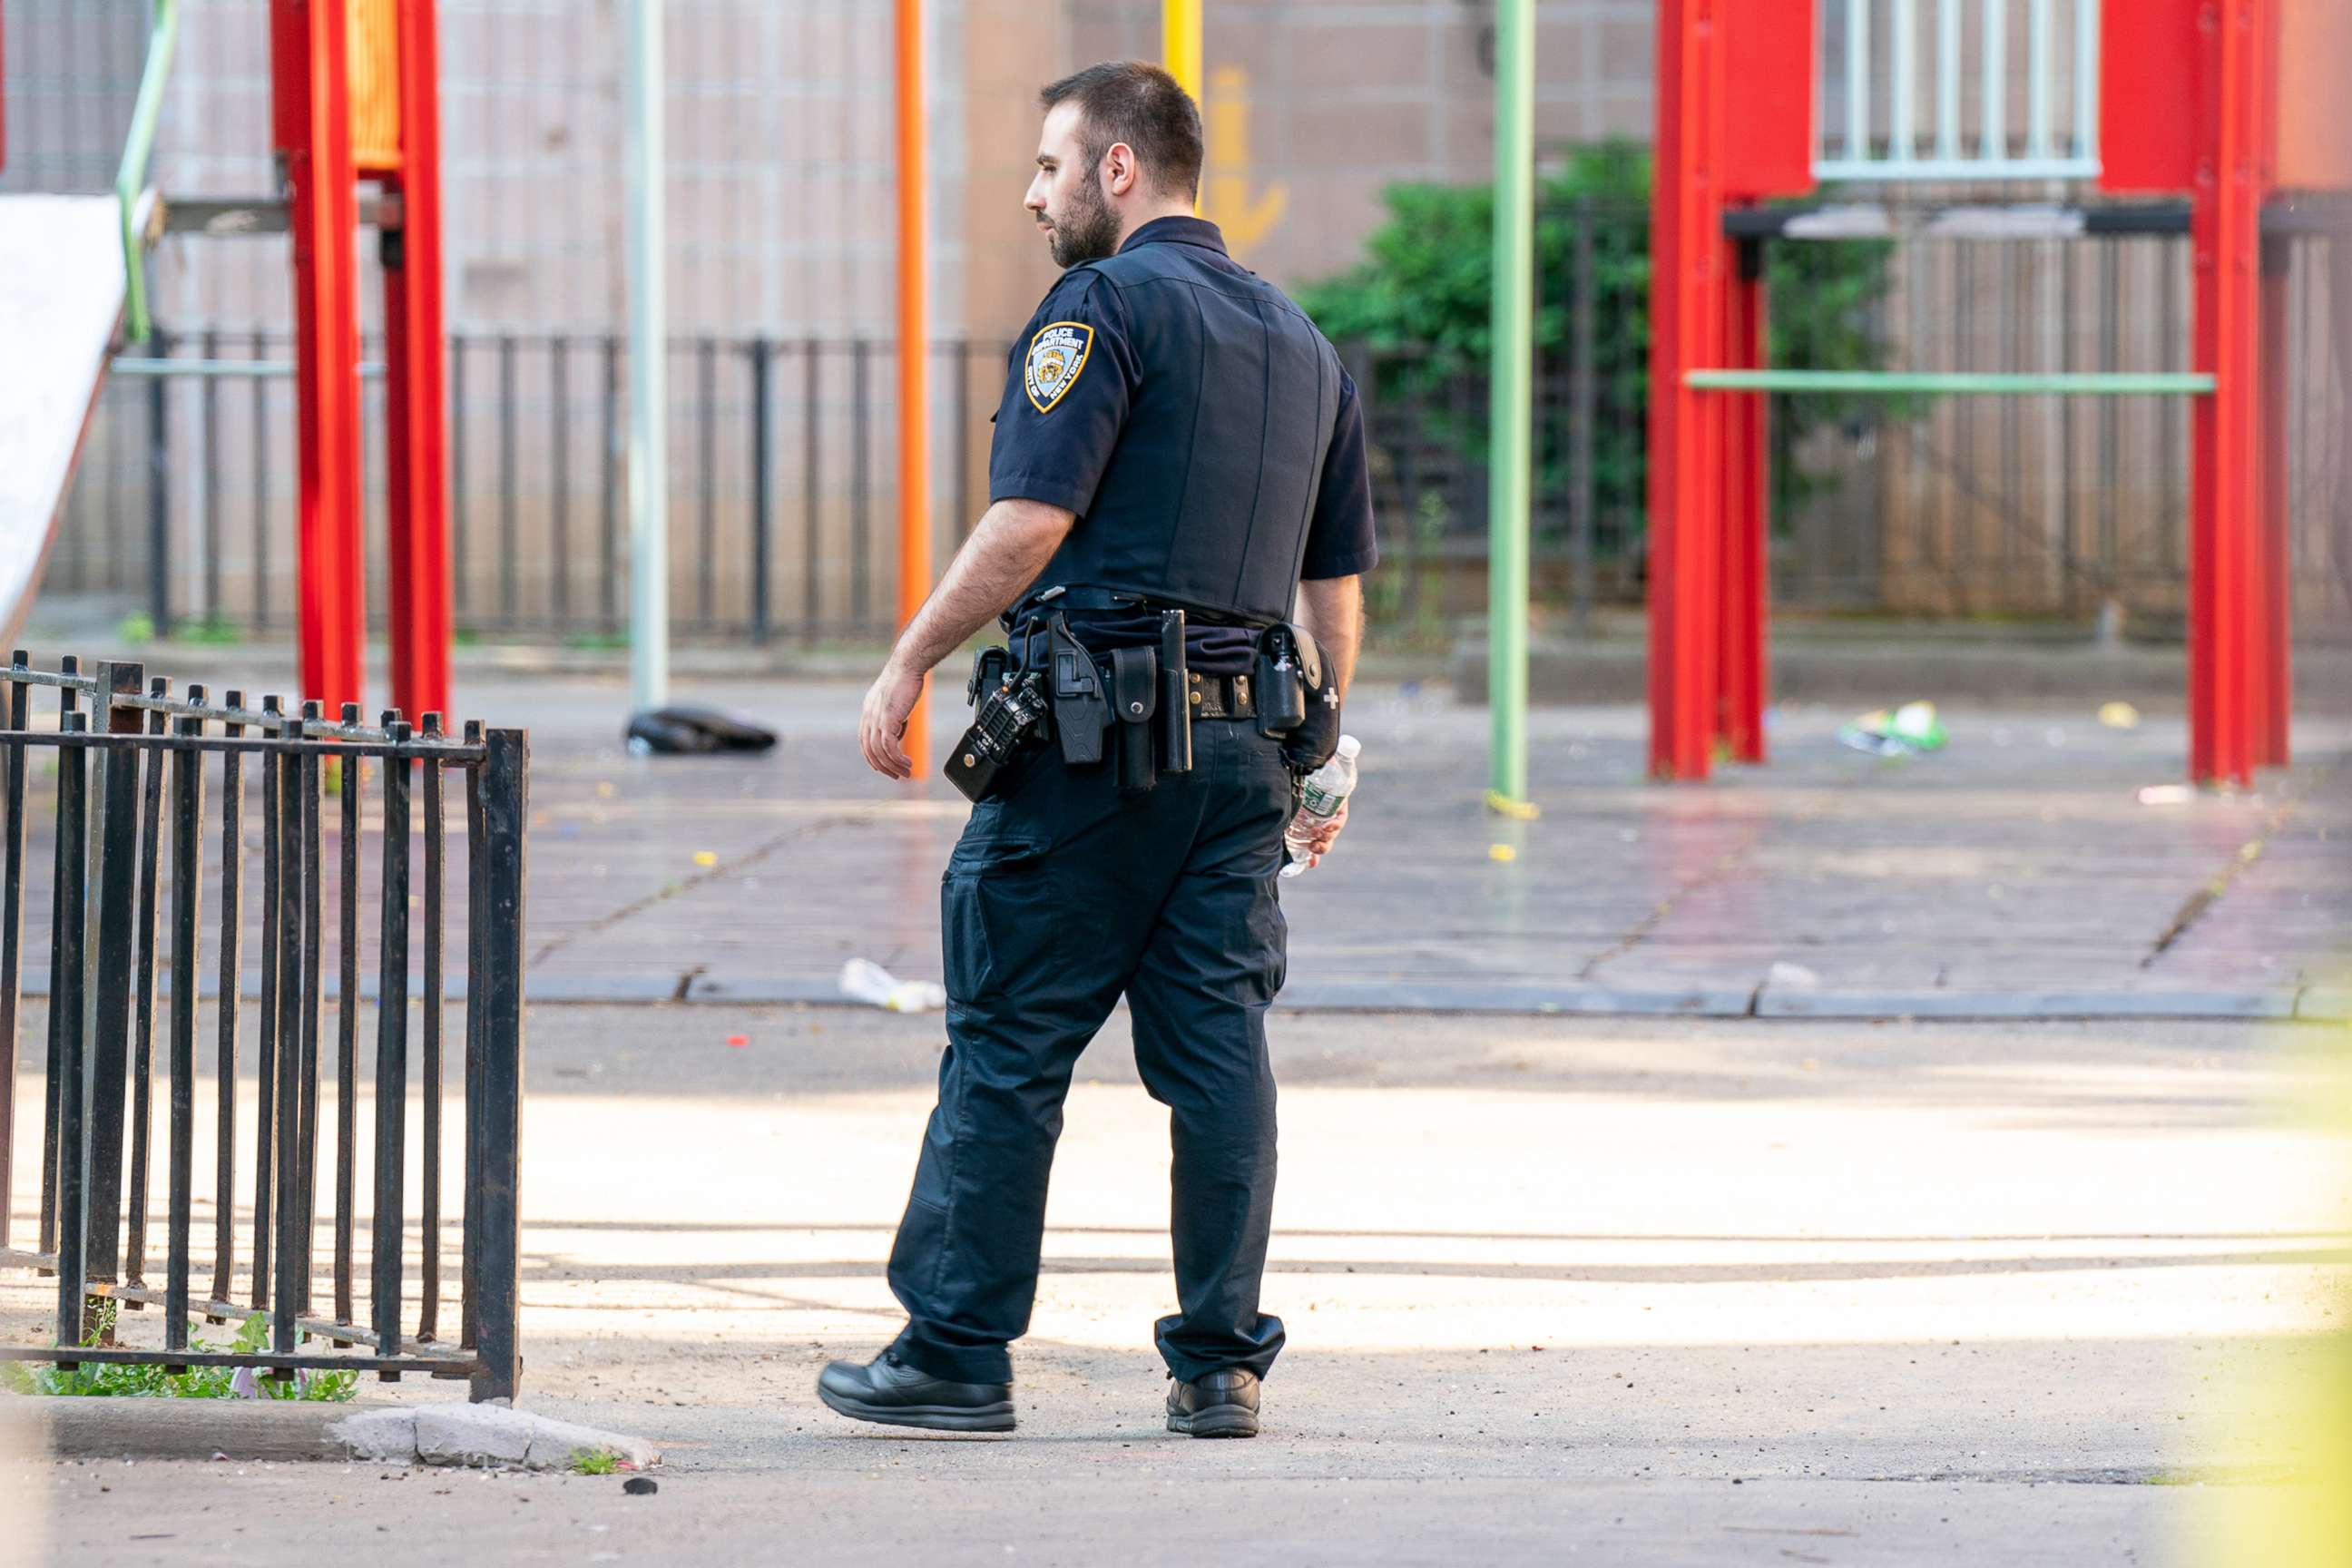 PHOTO: Police on the scene in Brooklyn on June 26, after a shooting on June 25, 2022.